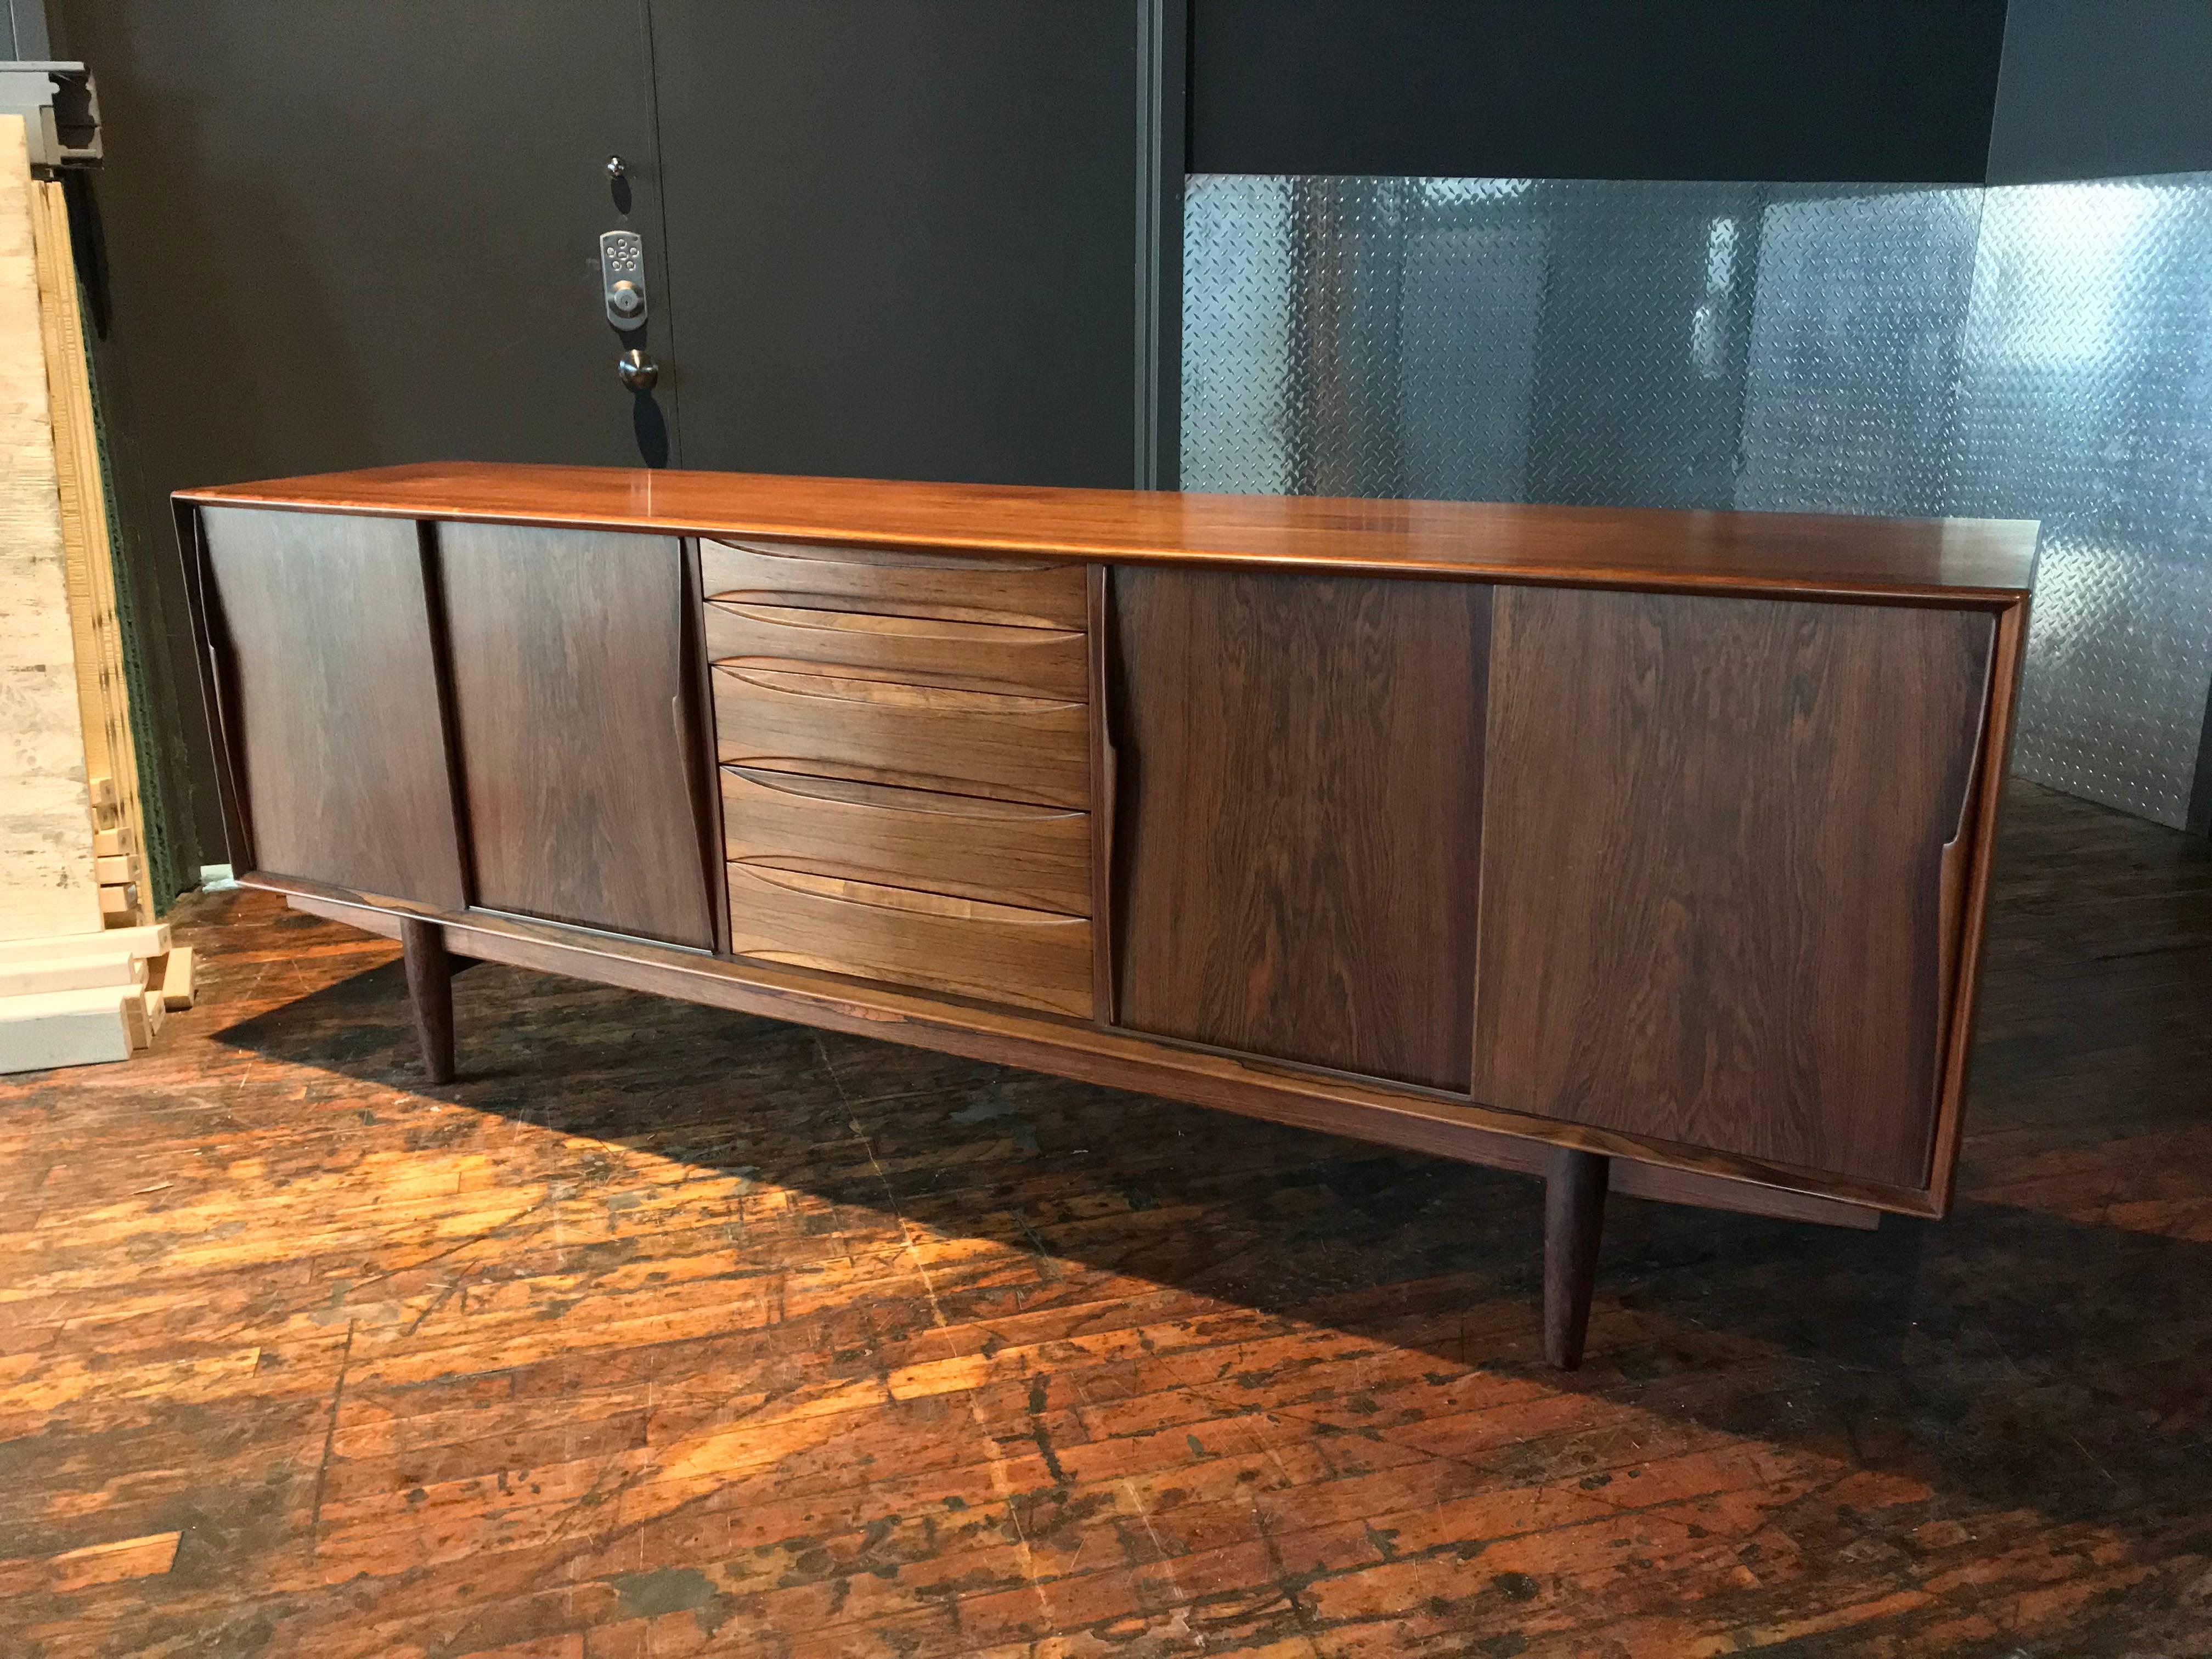 Arne Vodder rosewood sideboard fitted with two sliding doors hiding shelves and five drawers in the middle.